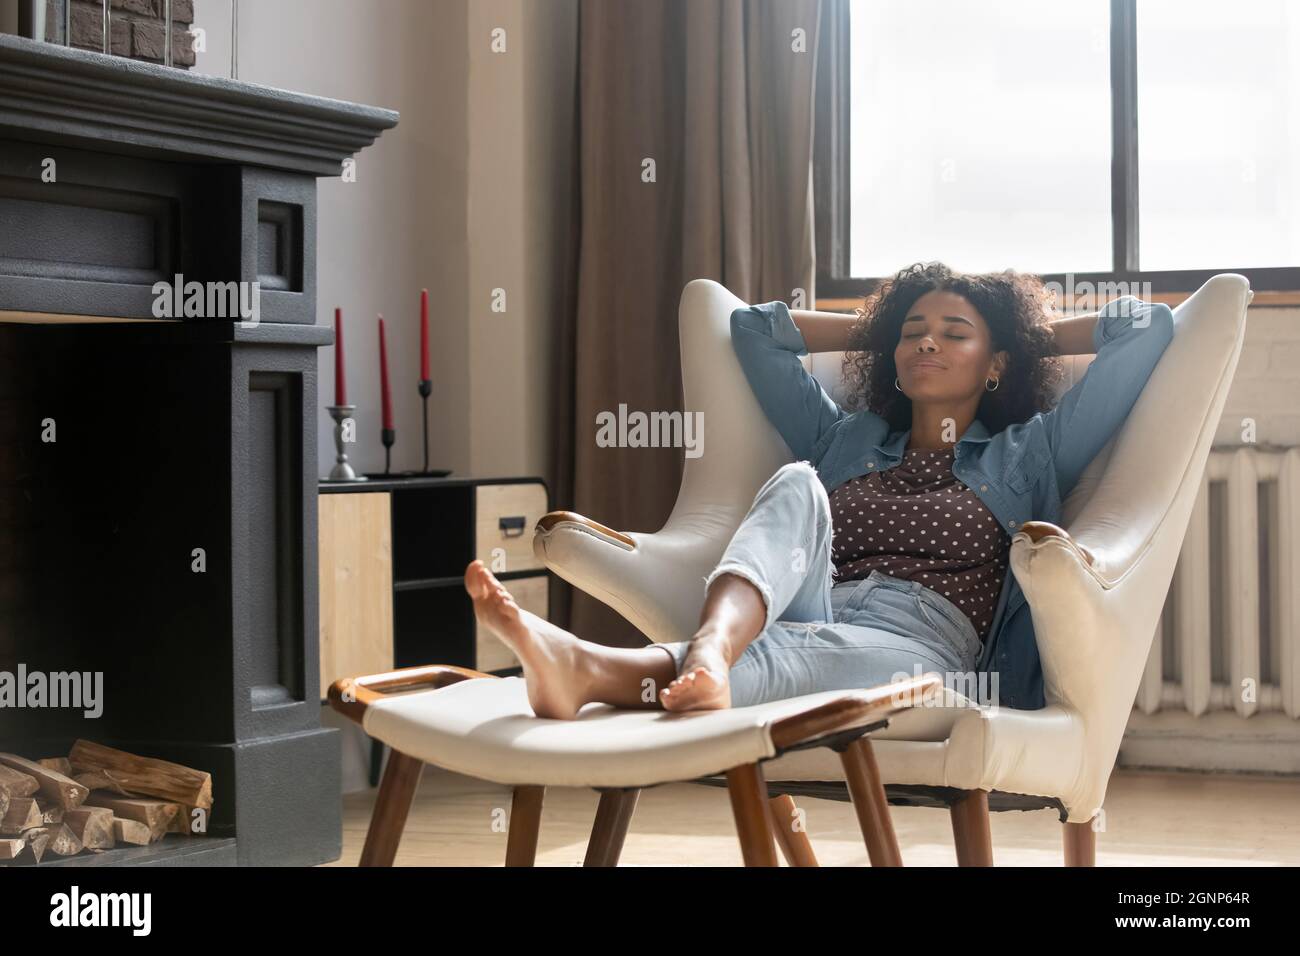 Relaxed African American woman sitting resting in comfortable armchair Stock Photo